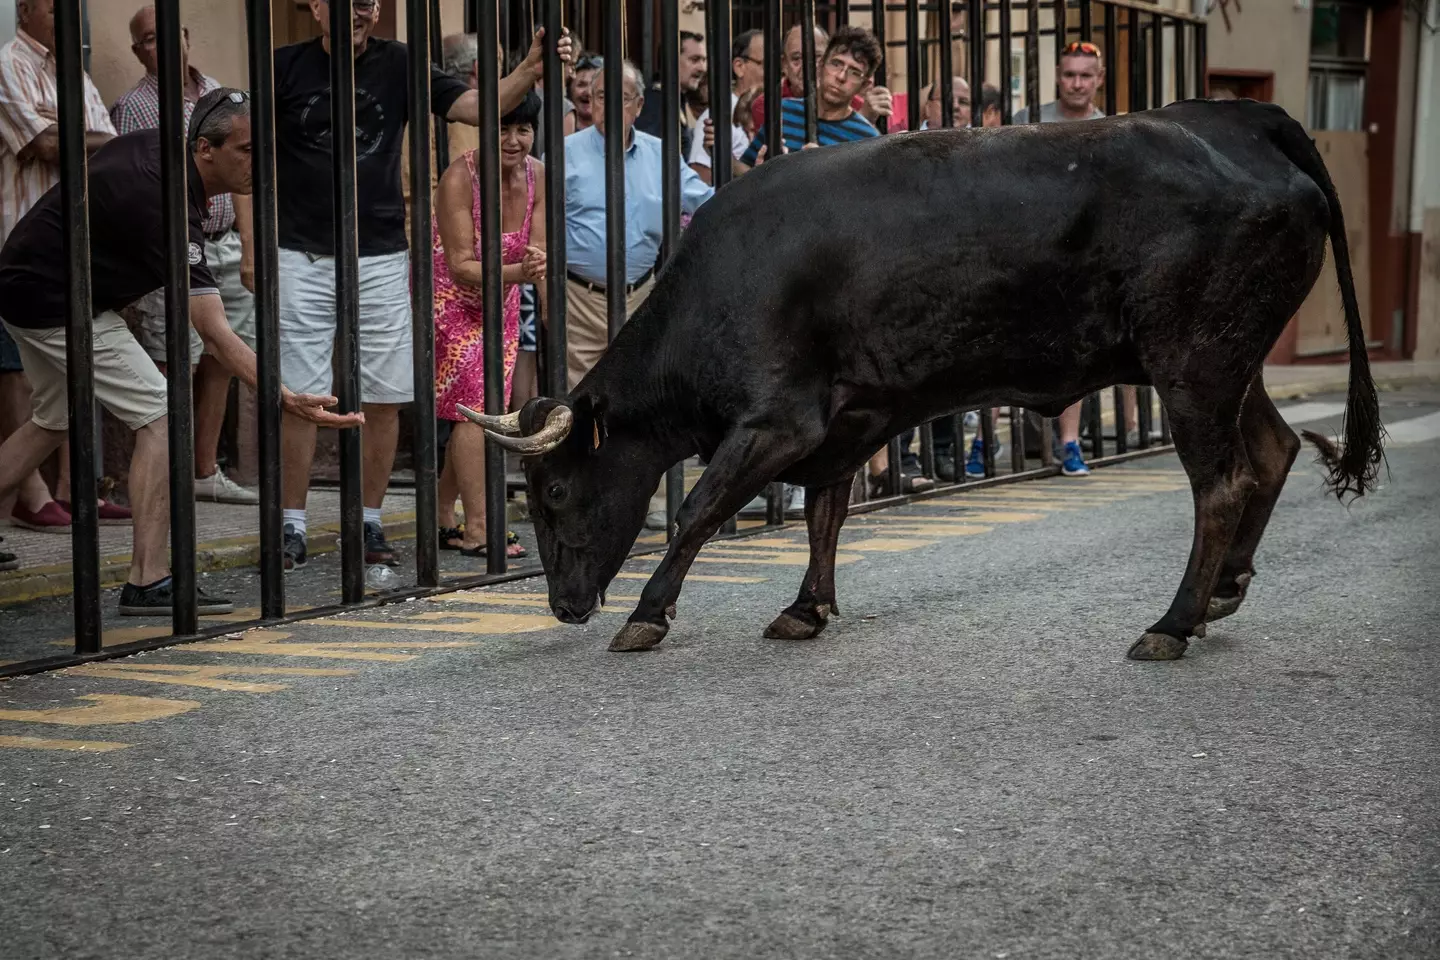 Traditional Bull Running through a small village just outside Calpe, Spain.